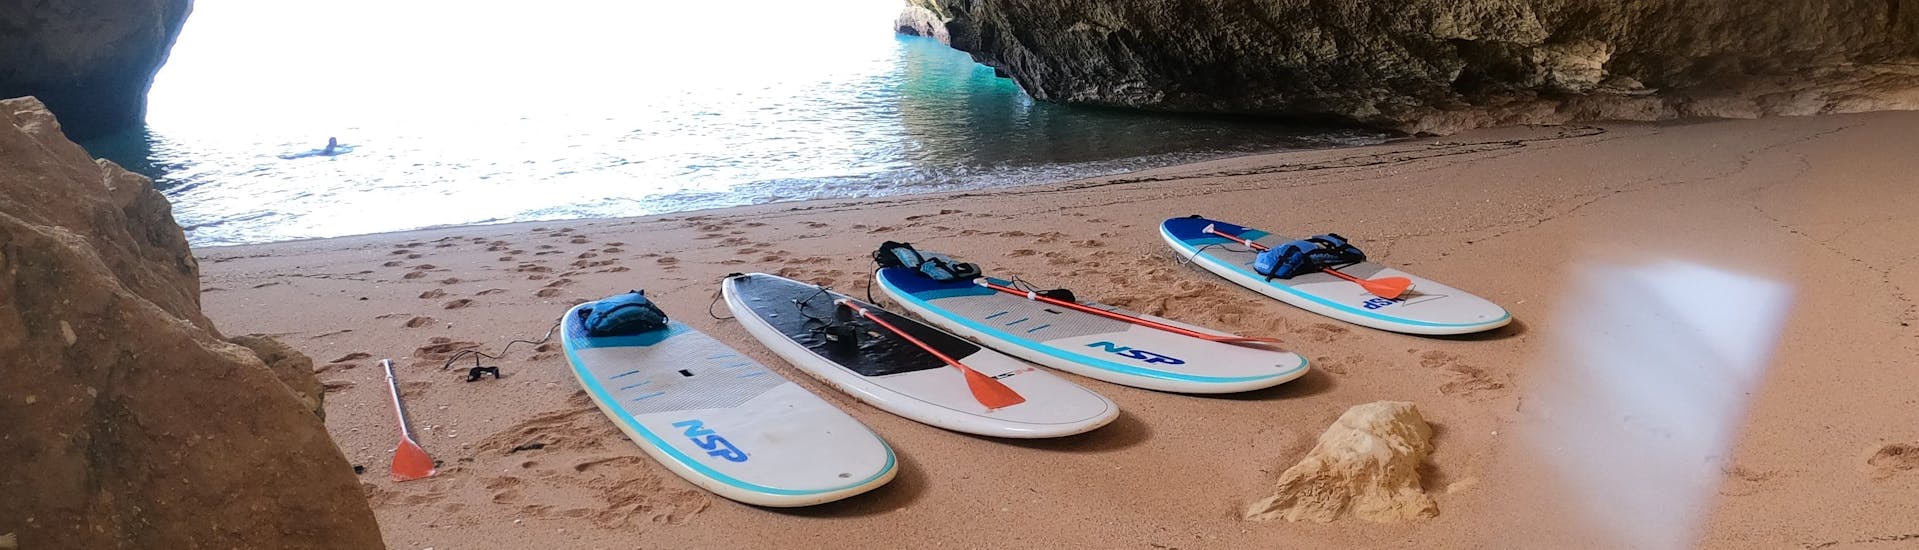 The boards are on the sand while we are exploring the caves during the Guided Stand Up Paddle Tour to the Benagil Caves with SUPA Sea Adventures Algarve.